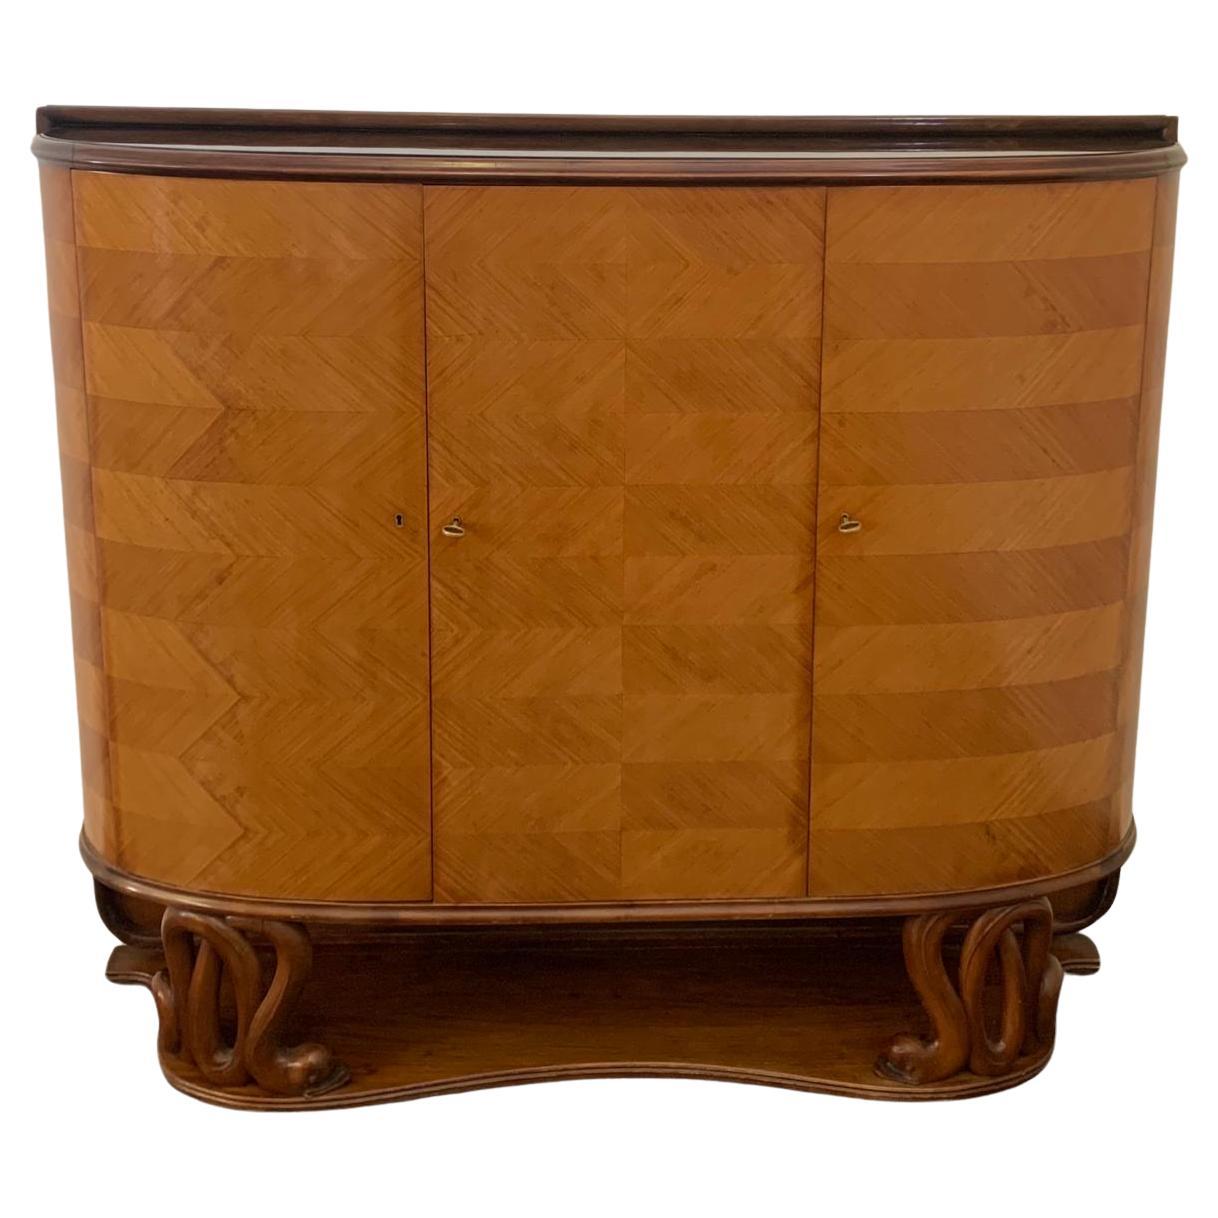 Mahogany sideboard veneered in cherry wood by Fratelli Tagliabue, 1940s For Sale